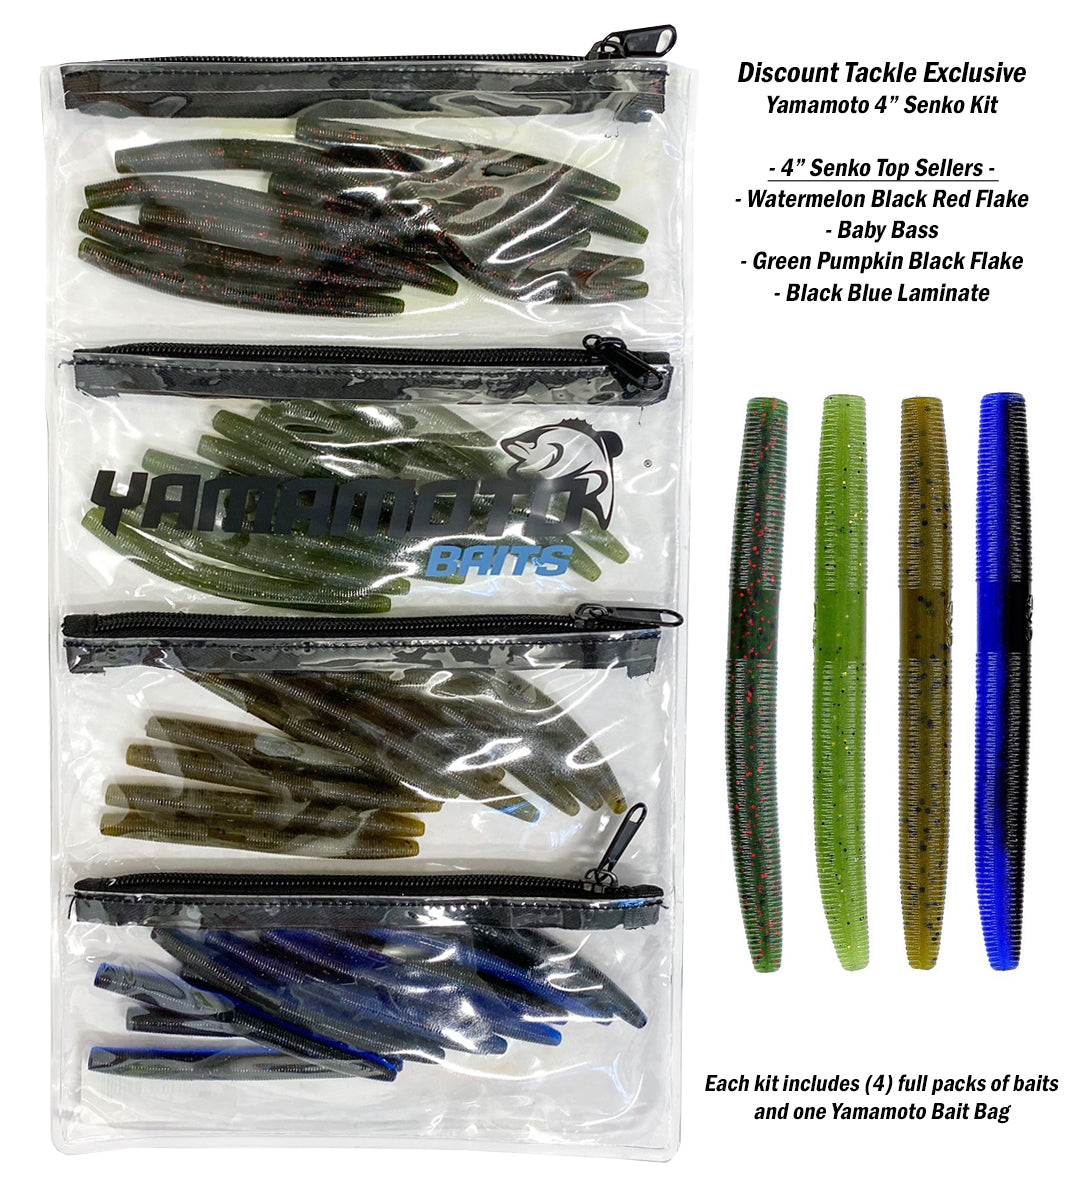 Wholesale Electric Fishing Lure at cheap prices